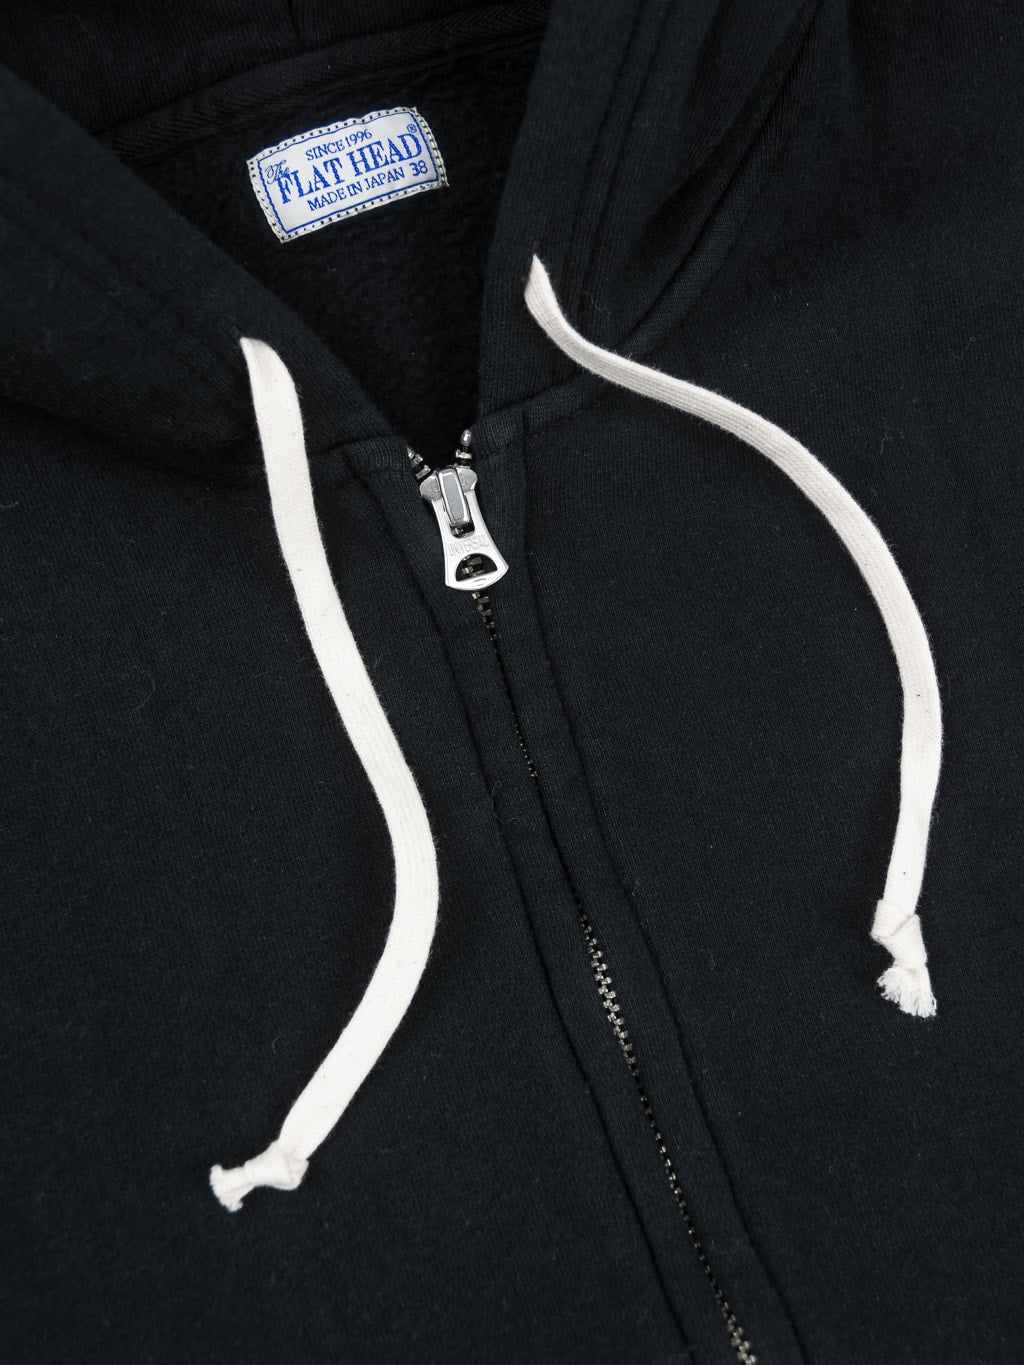 the flat head thermal zip hoodie black white cotton cords